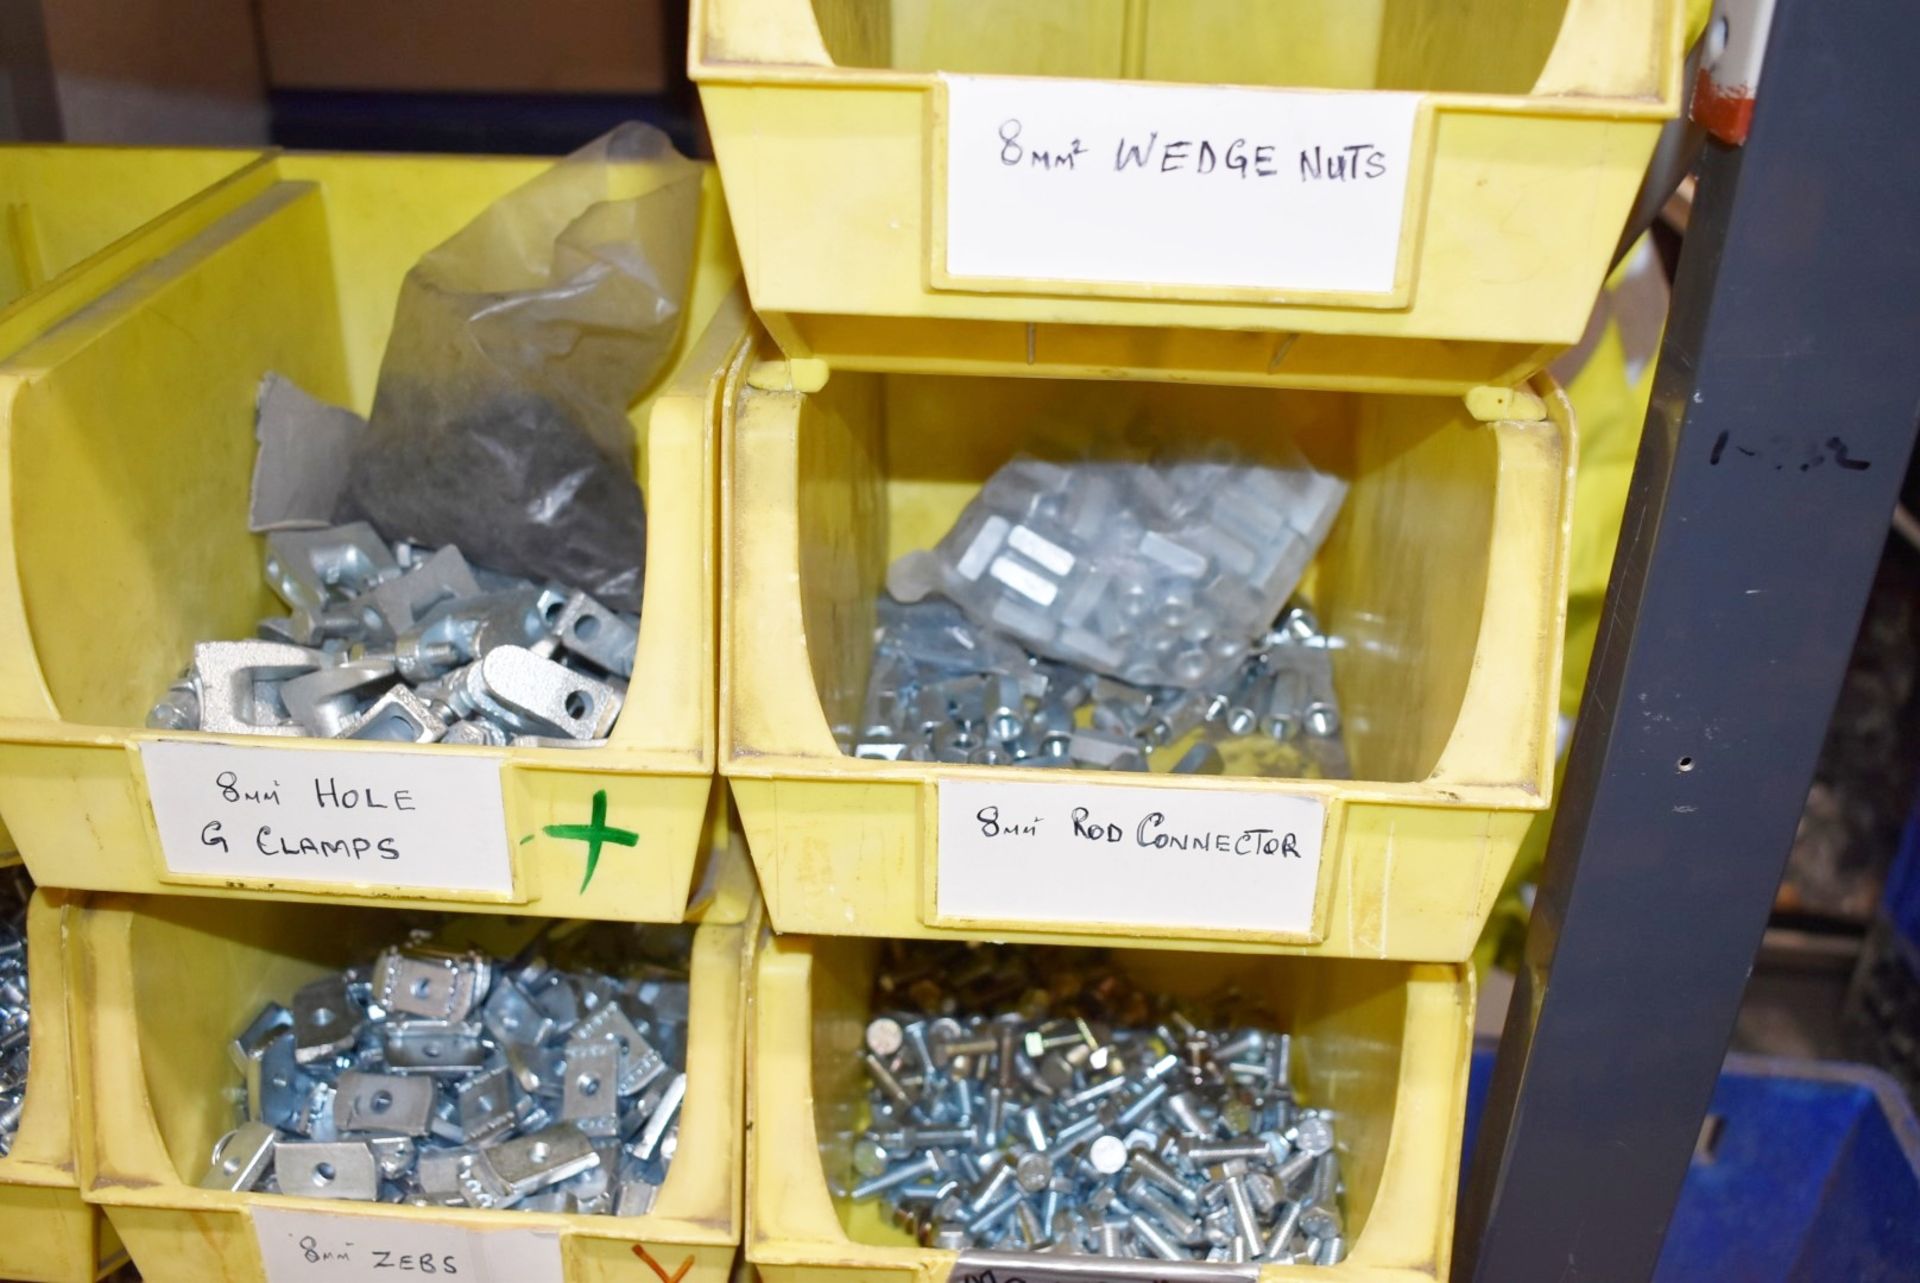 43 x Linbins With Contents - Clamps, Rod Connectors, Zebs, Washers, Bolts, Hex Nuts, Cleats & More! - Image 6 of 37